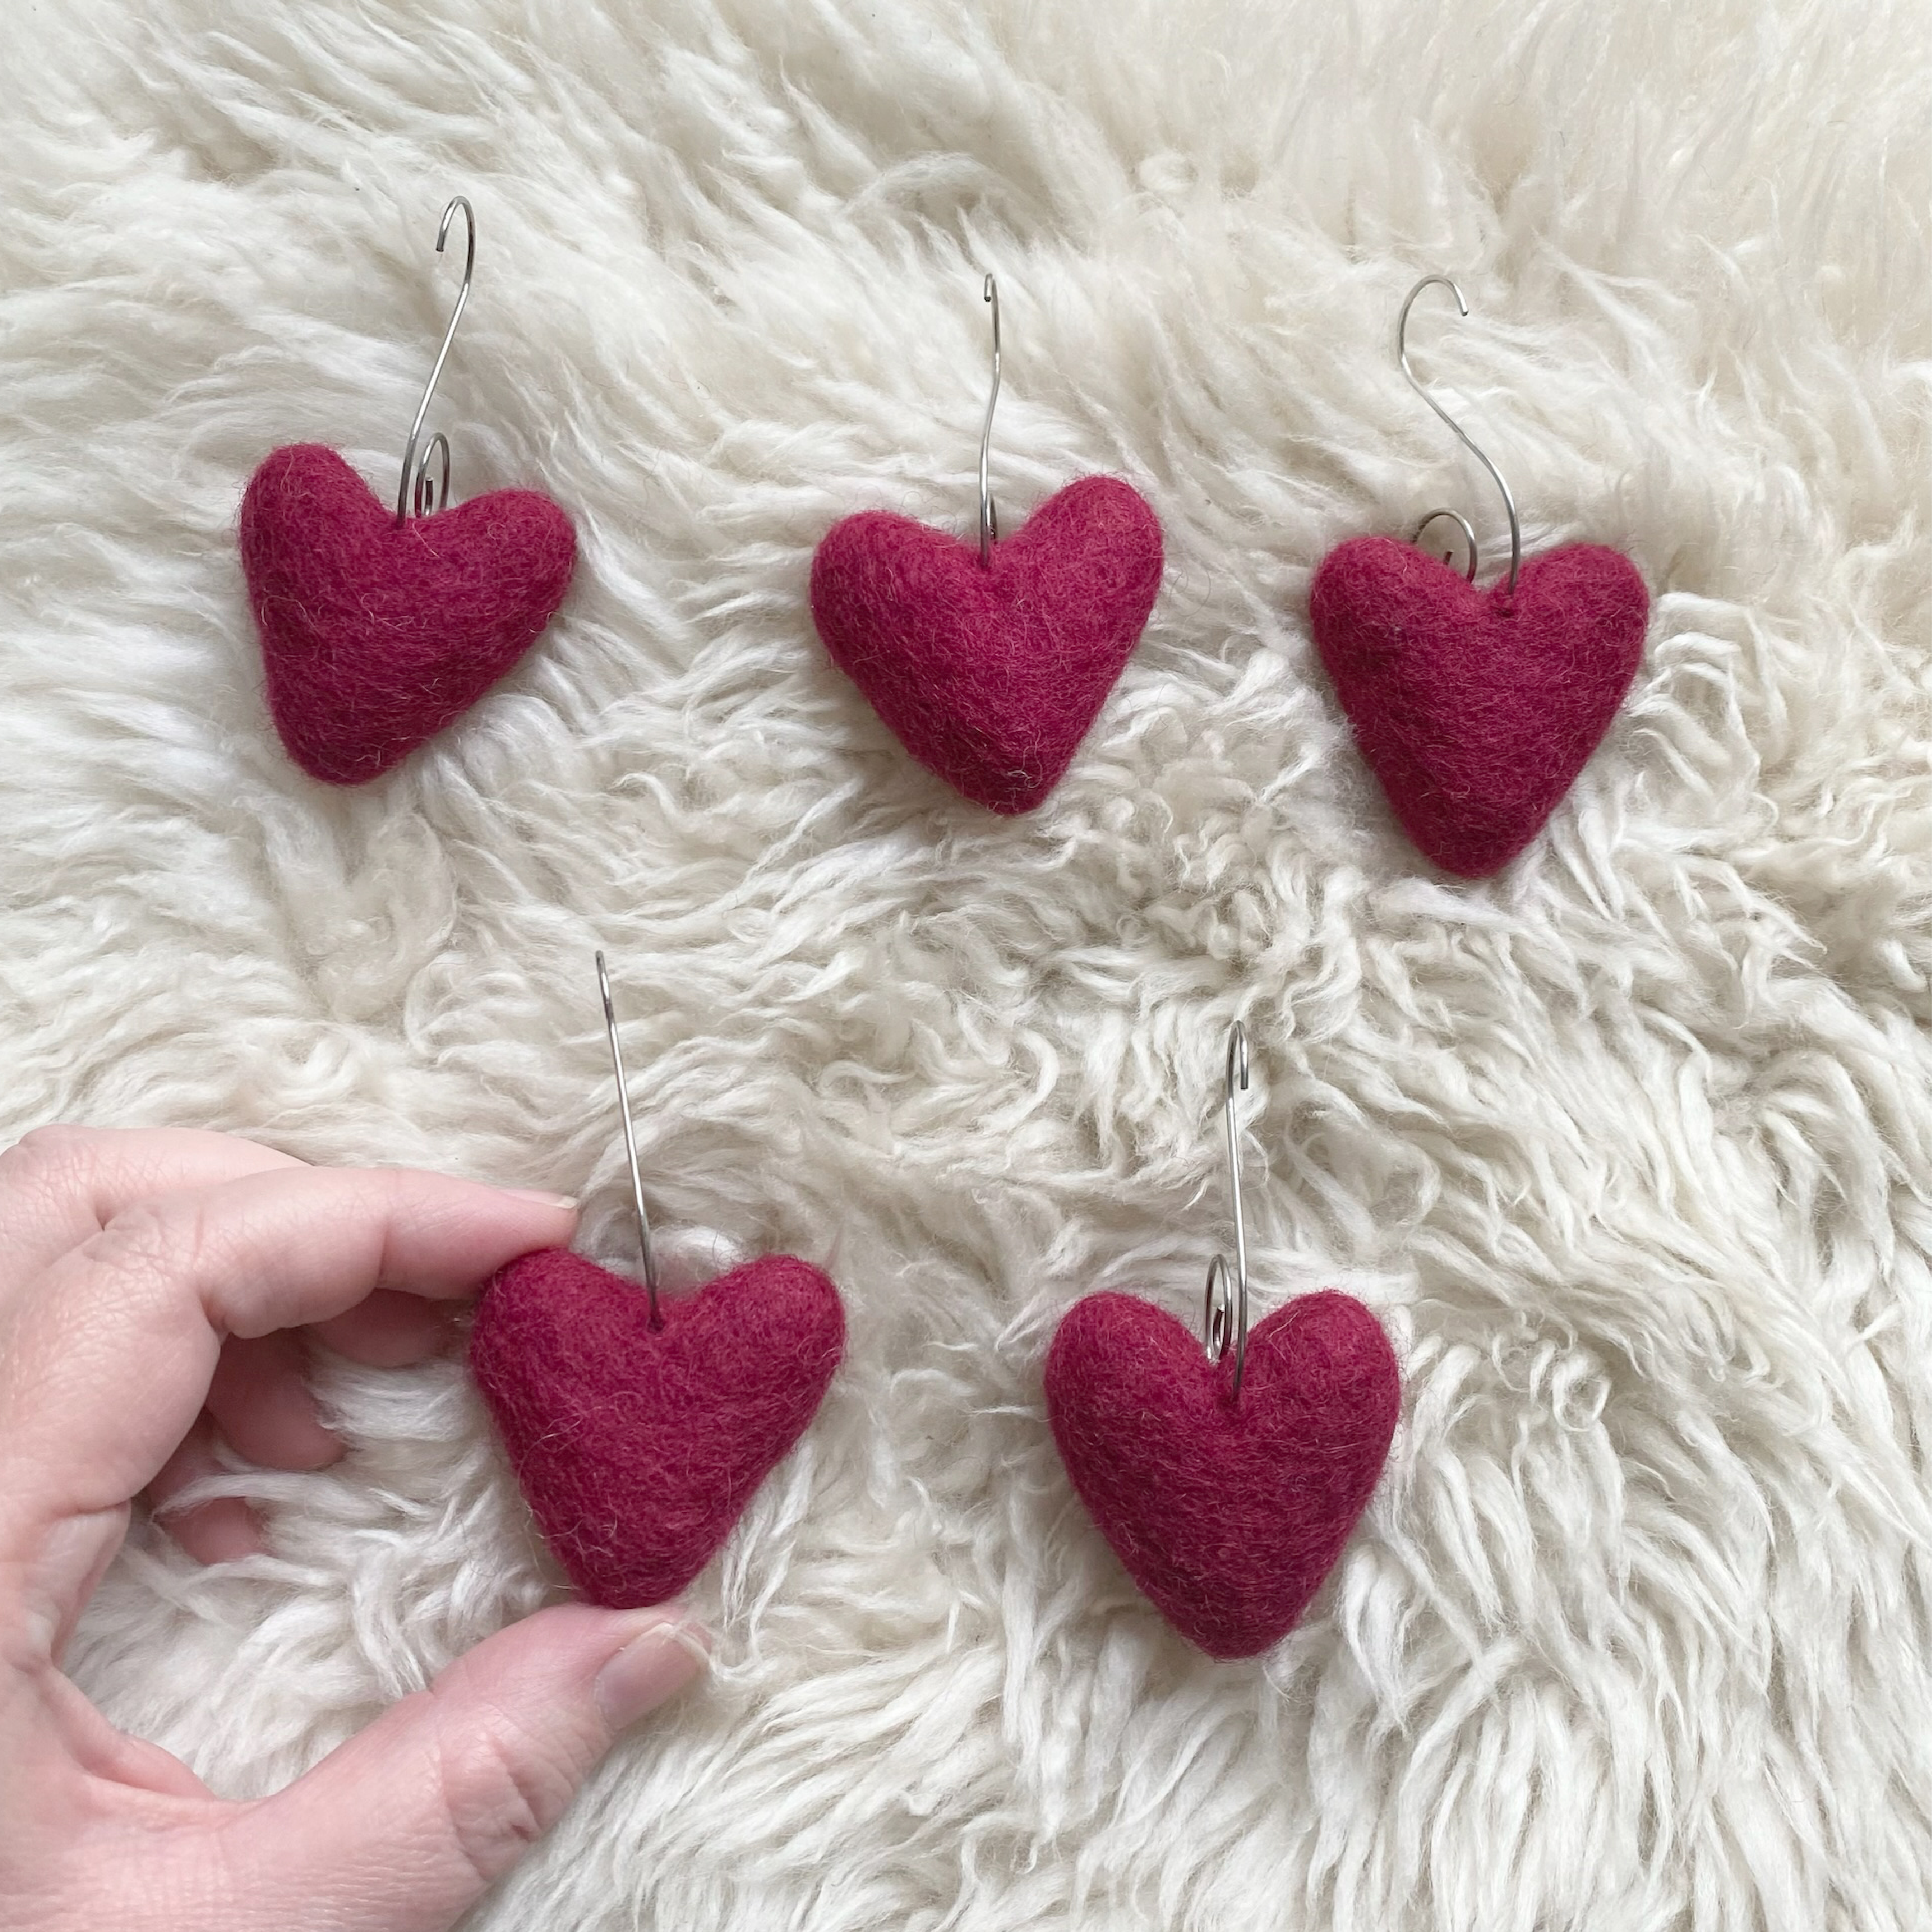 Felted Heart Ornaments